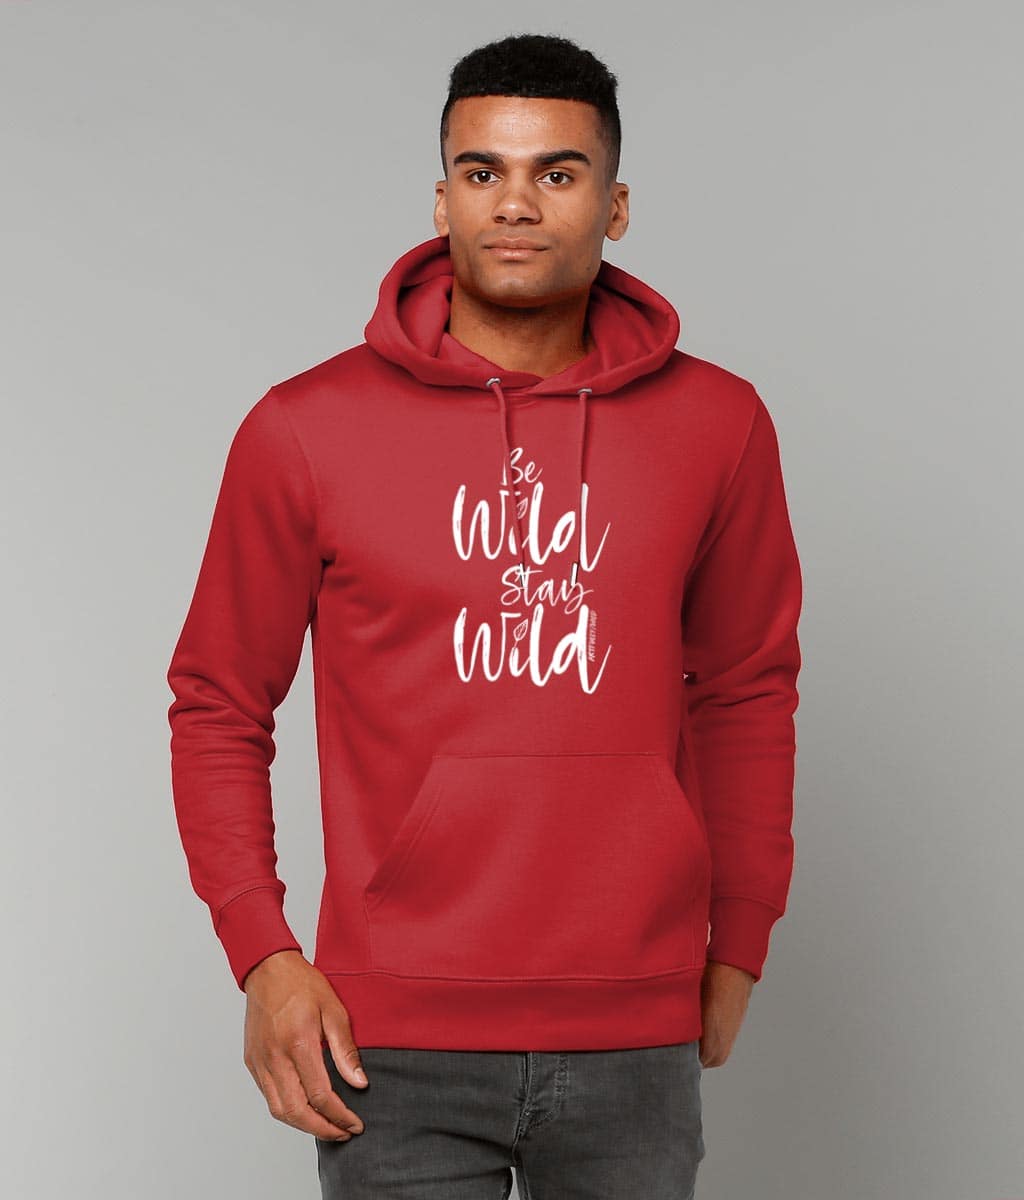 Man wearing ‘BE WILD STAY WILD’ Classic Bright Red Hoodie. Unisex/Men/Women. Made with Certified Organic Cotton. Printed in UK with water-based Inks. Sustainable Eco-friendly Clothing. Original Illustration by Artfully/Wild.